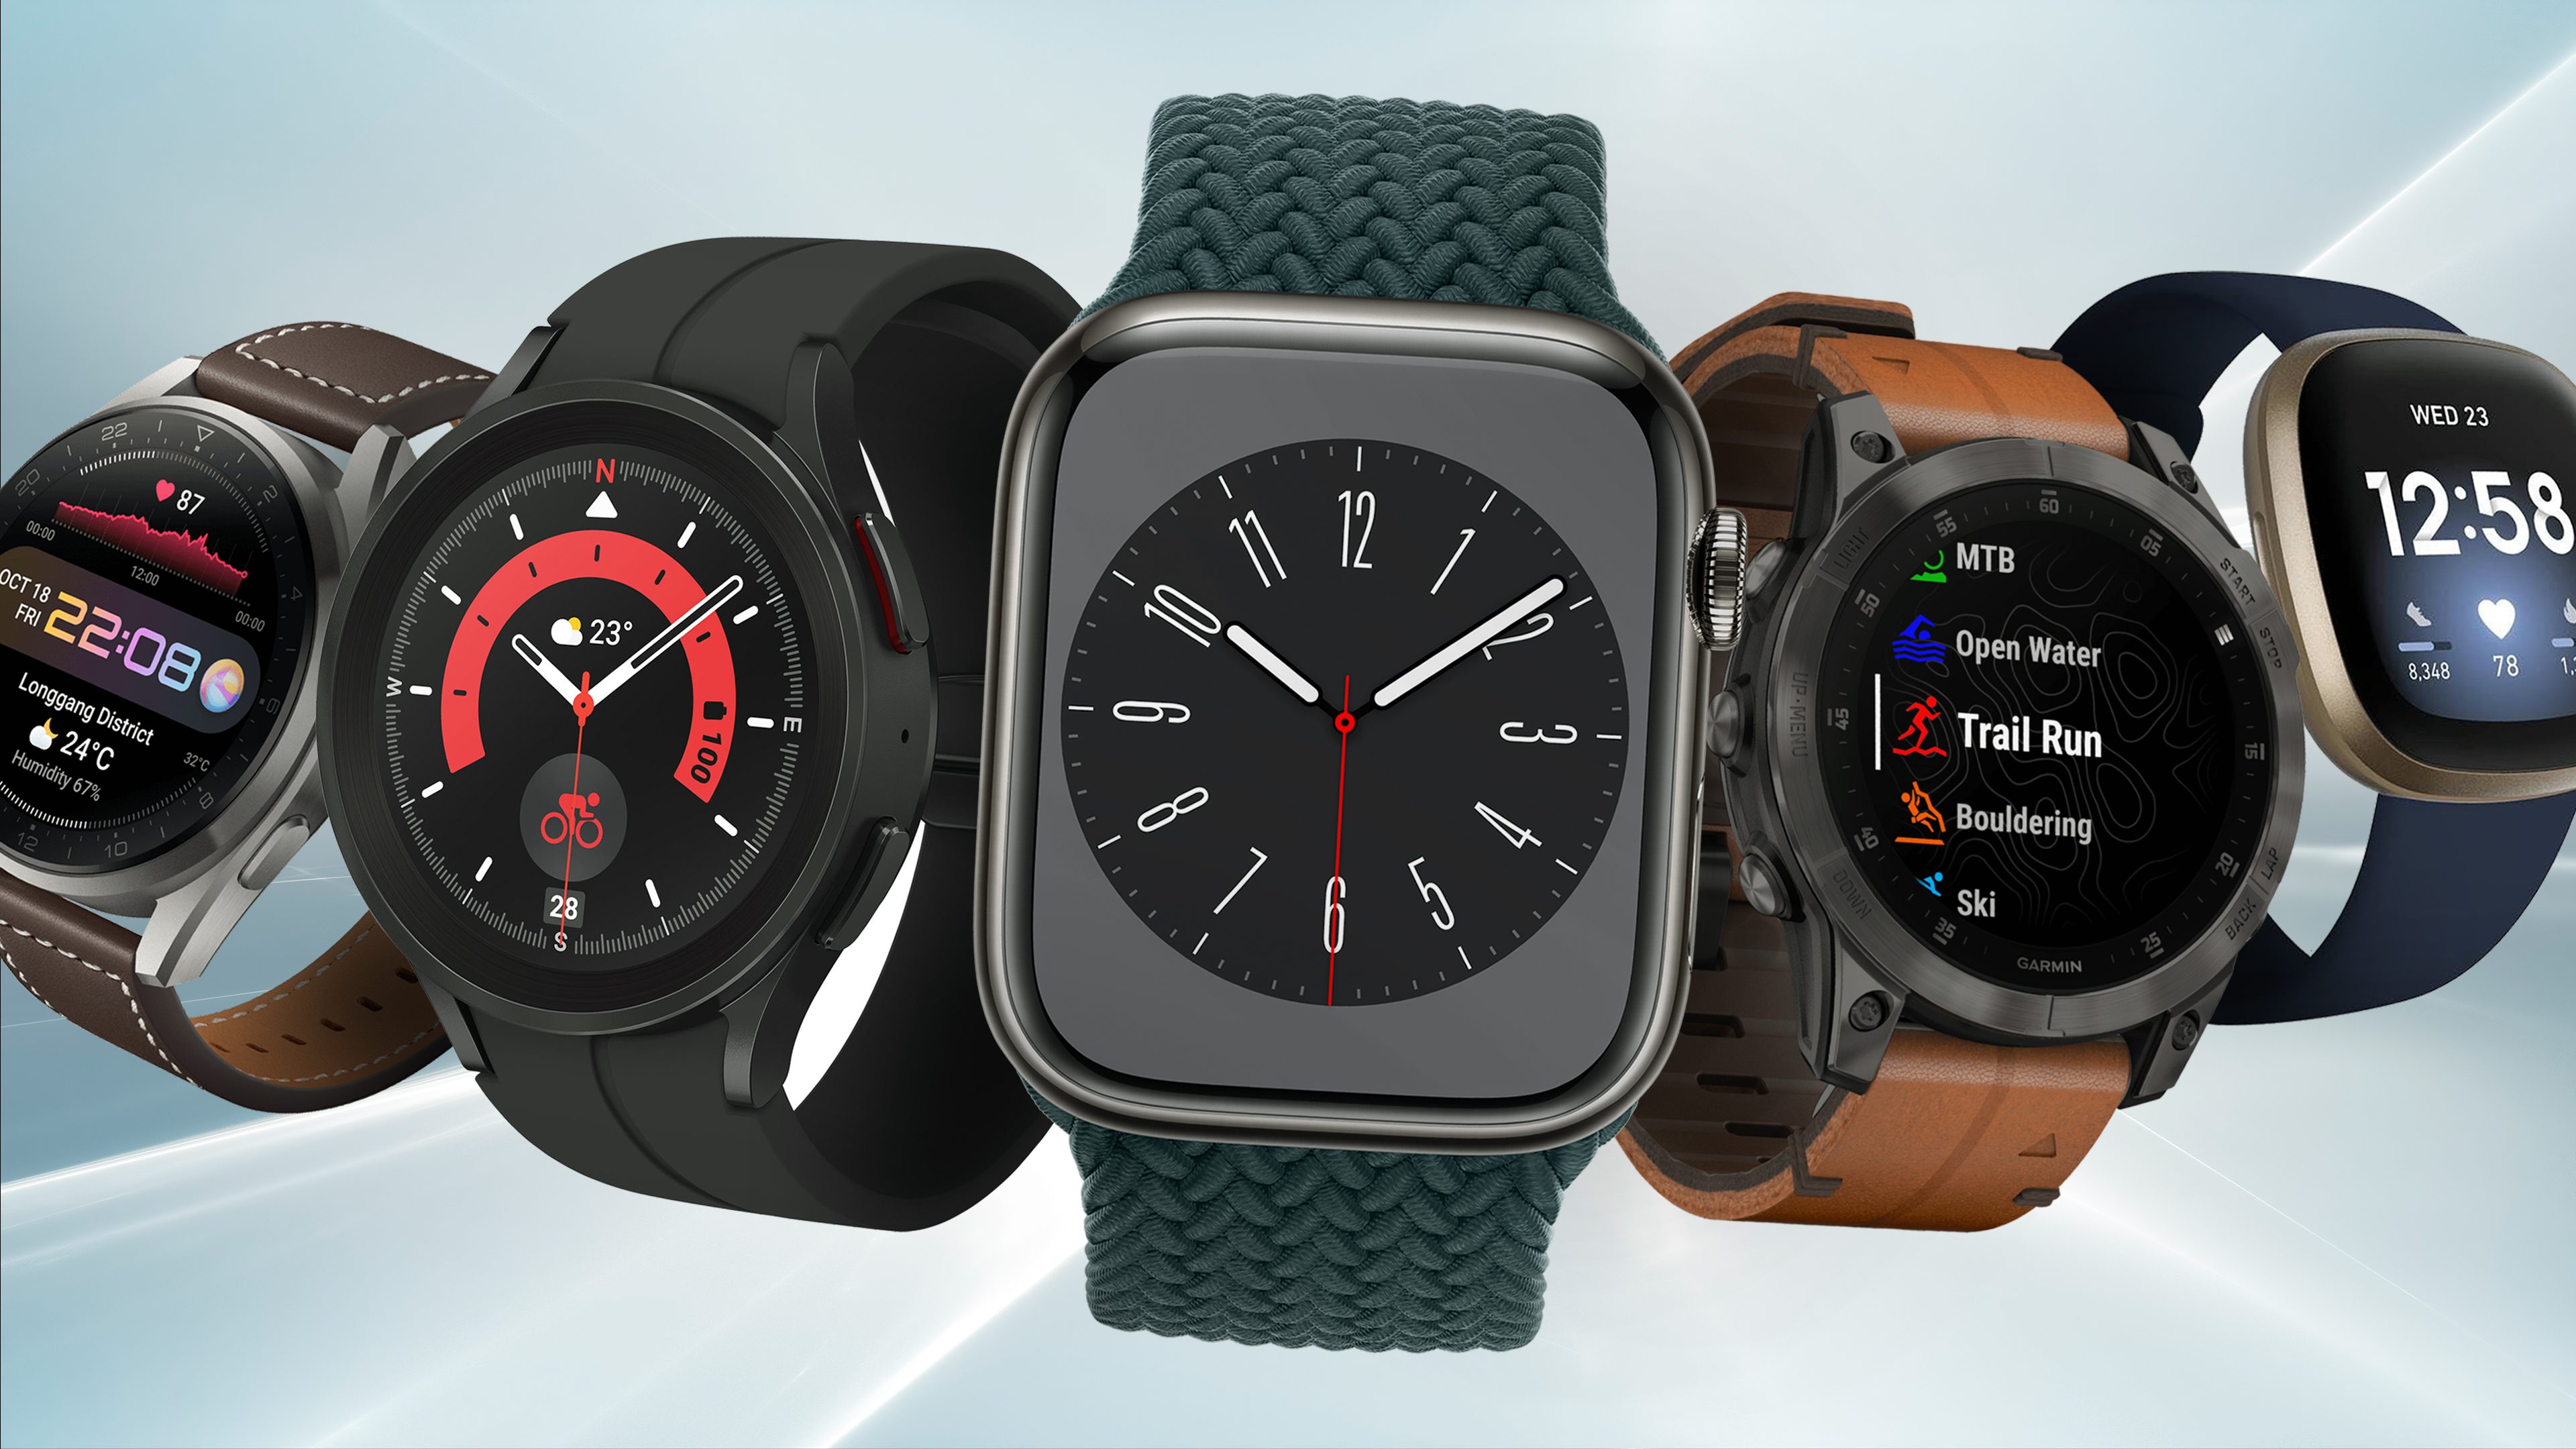 patrice behandle Visum Top Apple and Android Smartwatches of 2023: Our Comprehensive Guide |  NextPit